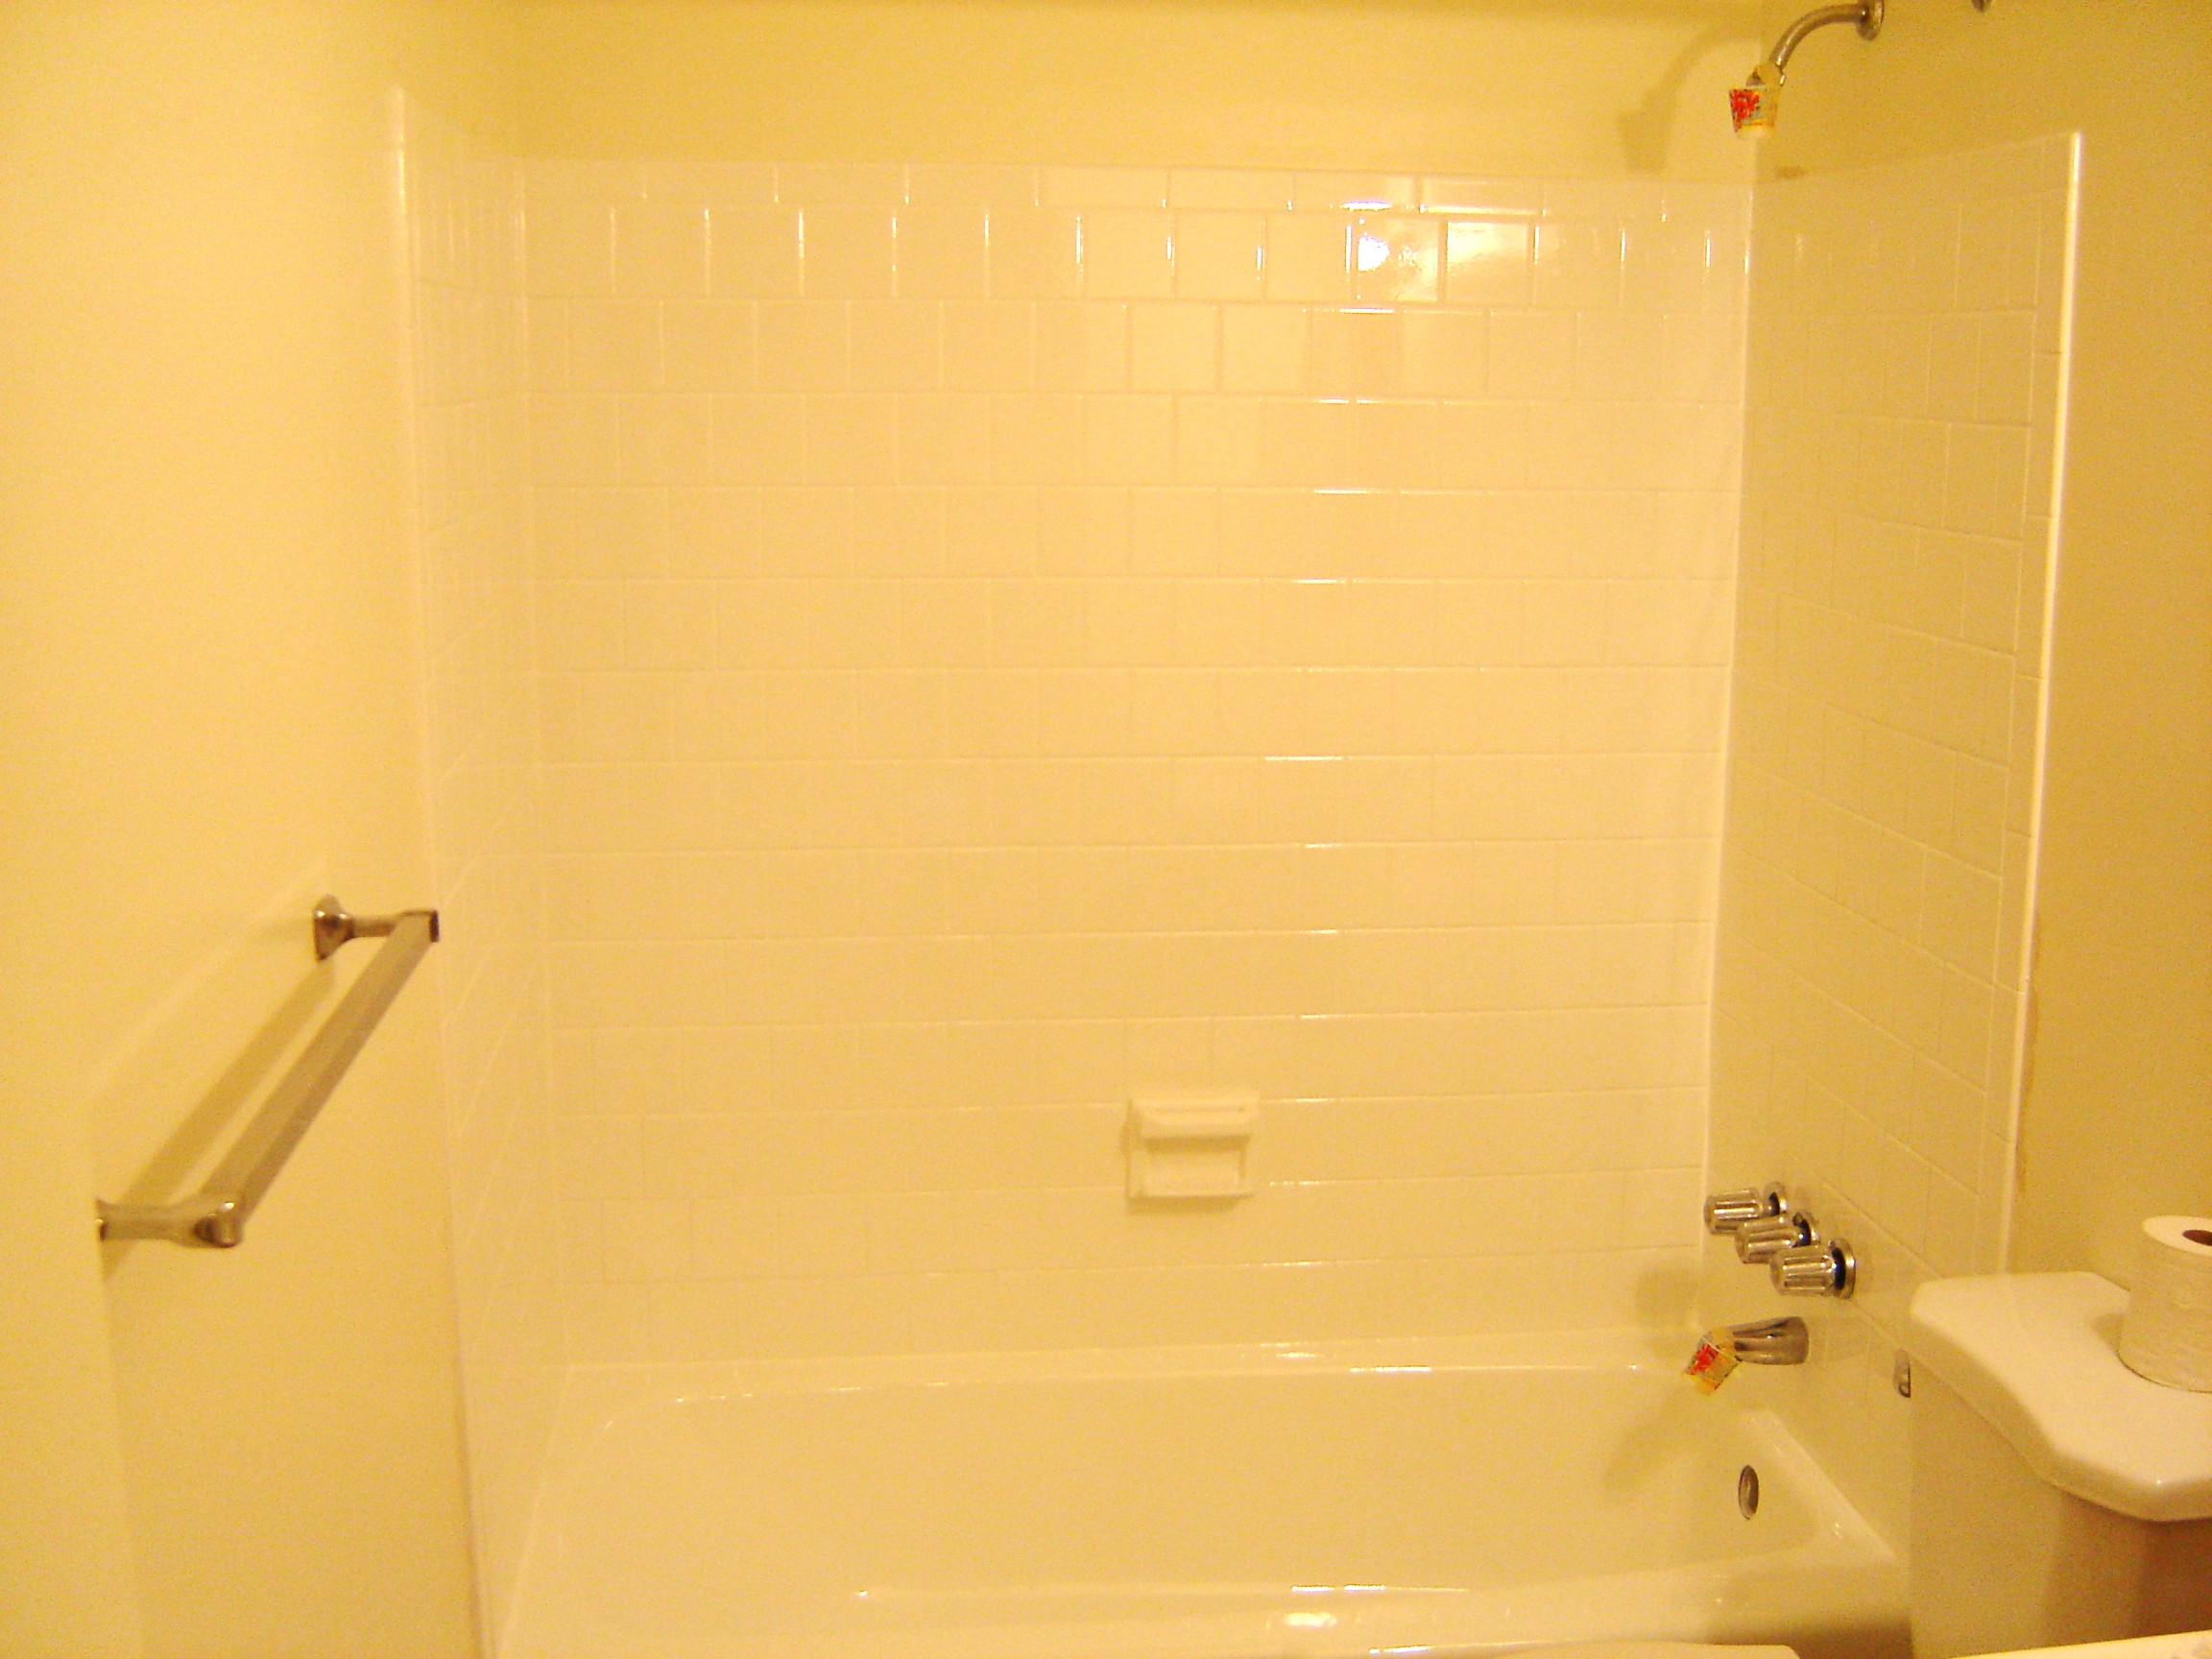 Tub Recoloring Photos Before After, How To Whiten A Yellowed Bathtub